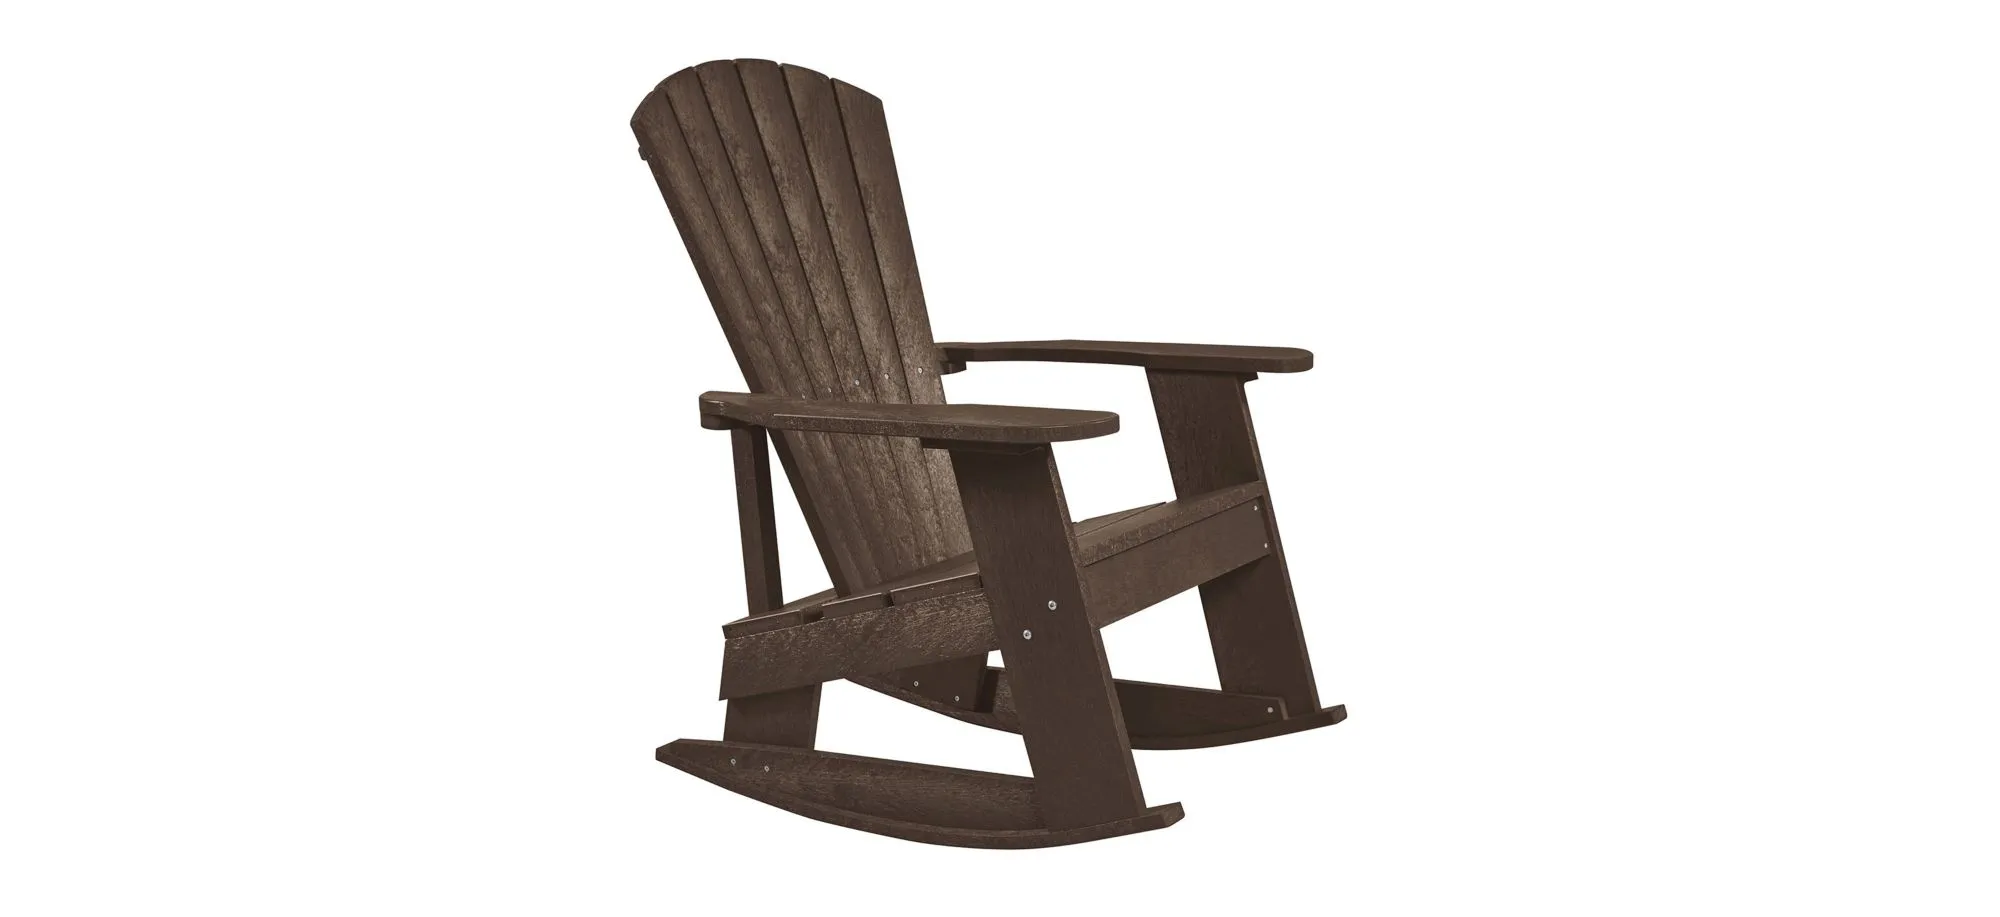 Capterra Casual Recycled Outdoor Adirondack Rocker in Gray And Cream by C.R. Plastic Products